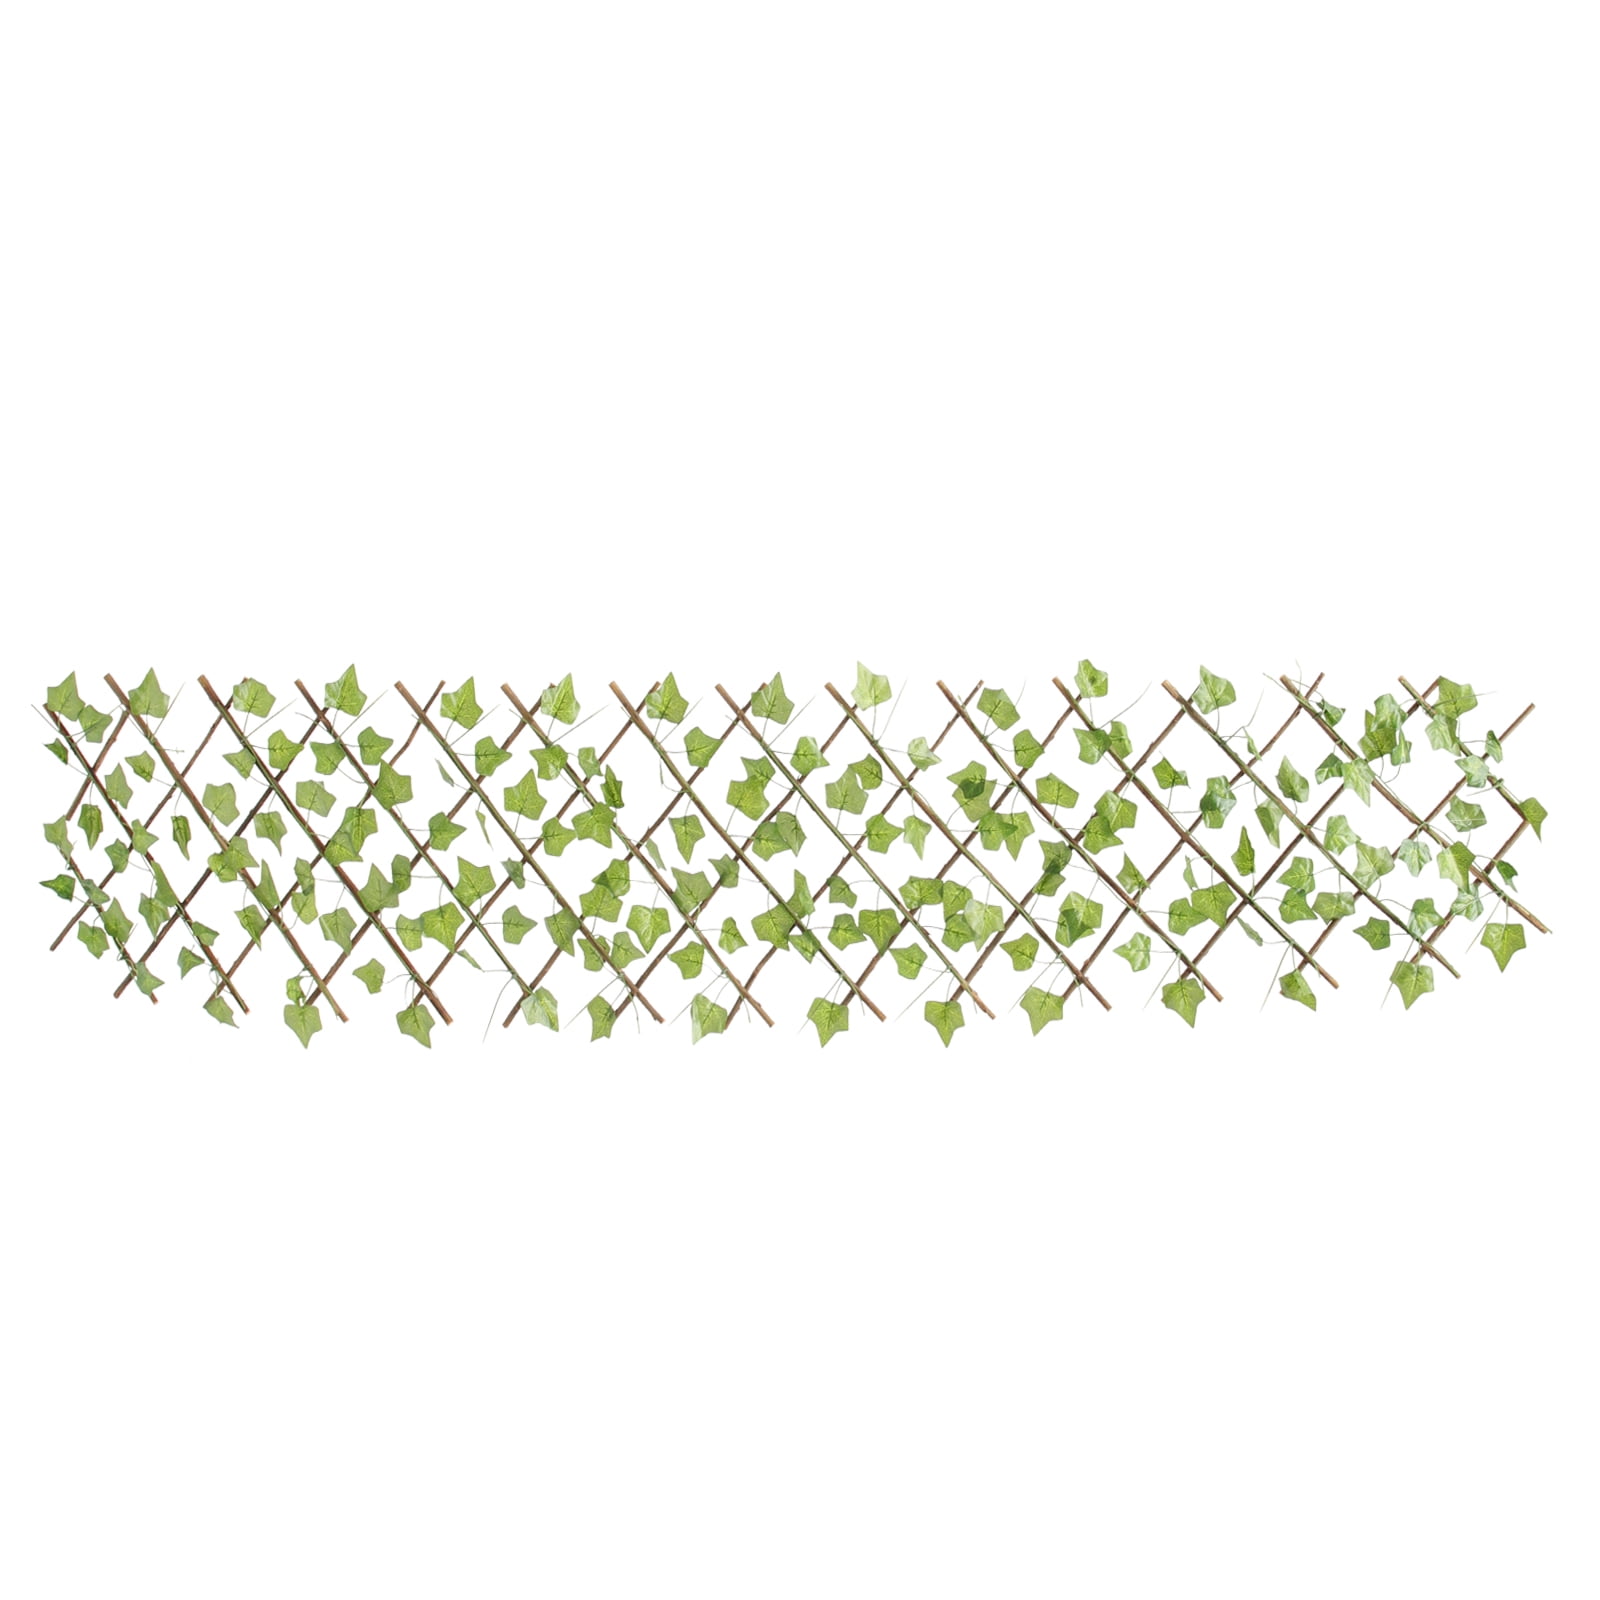 ColourTree Artificial Expandable Double-Sided Ivy Leaf Vines Willow Trellis Privacy Fencing Screen